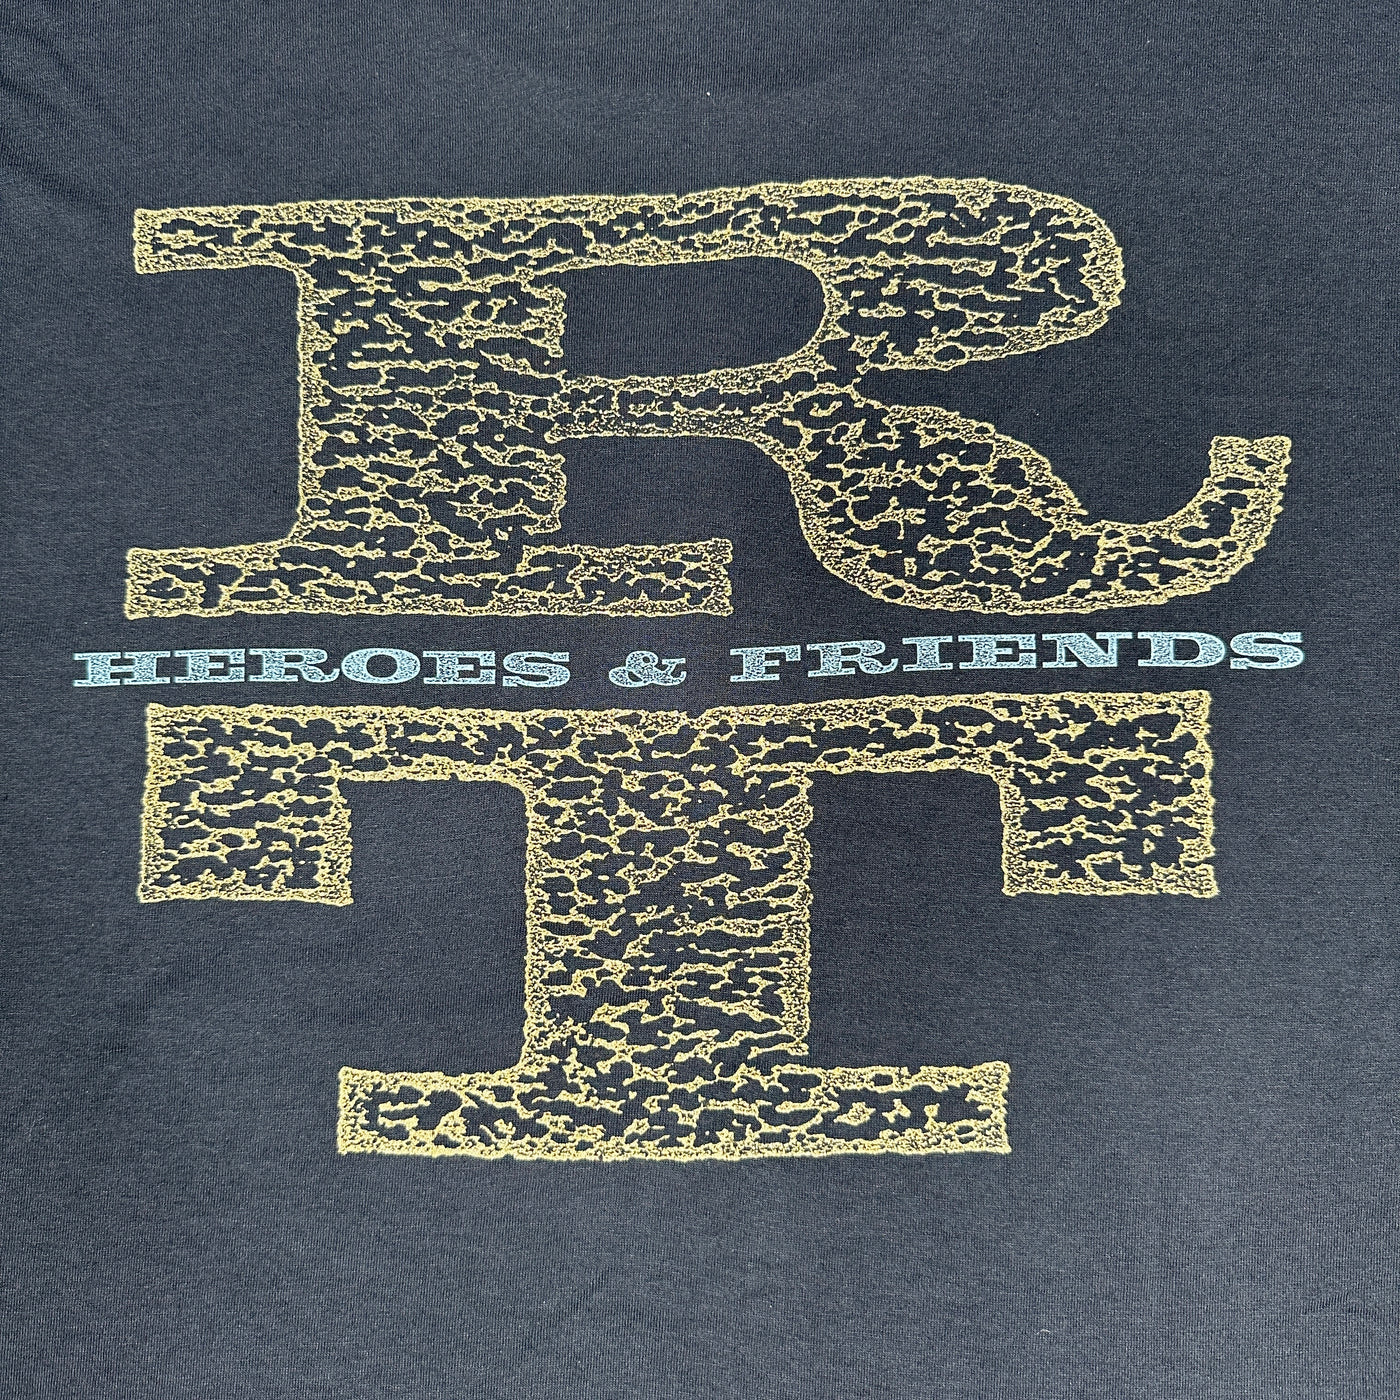 '91 Heroes and Friends Randy Travis Band T-shirt sz L